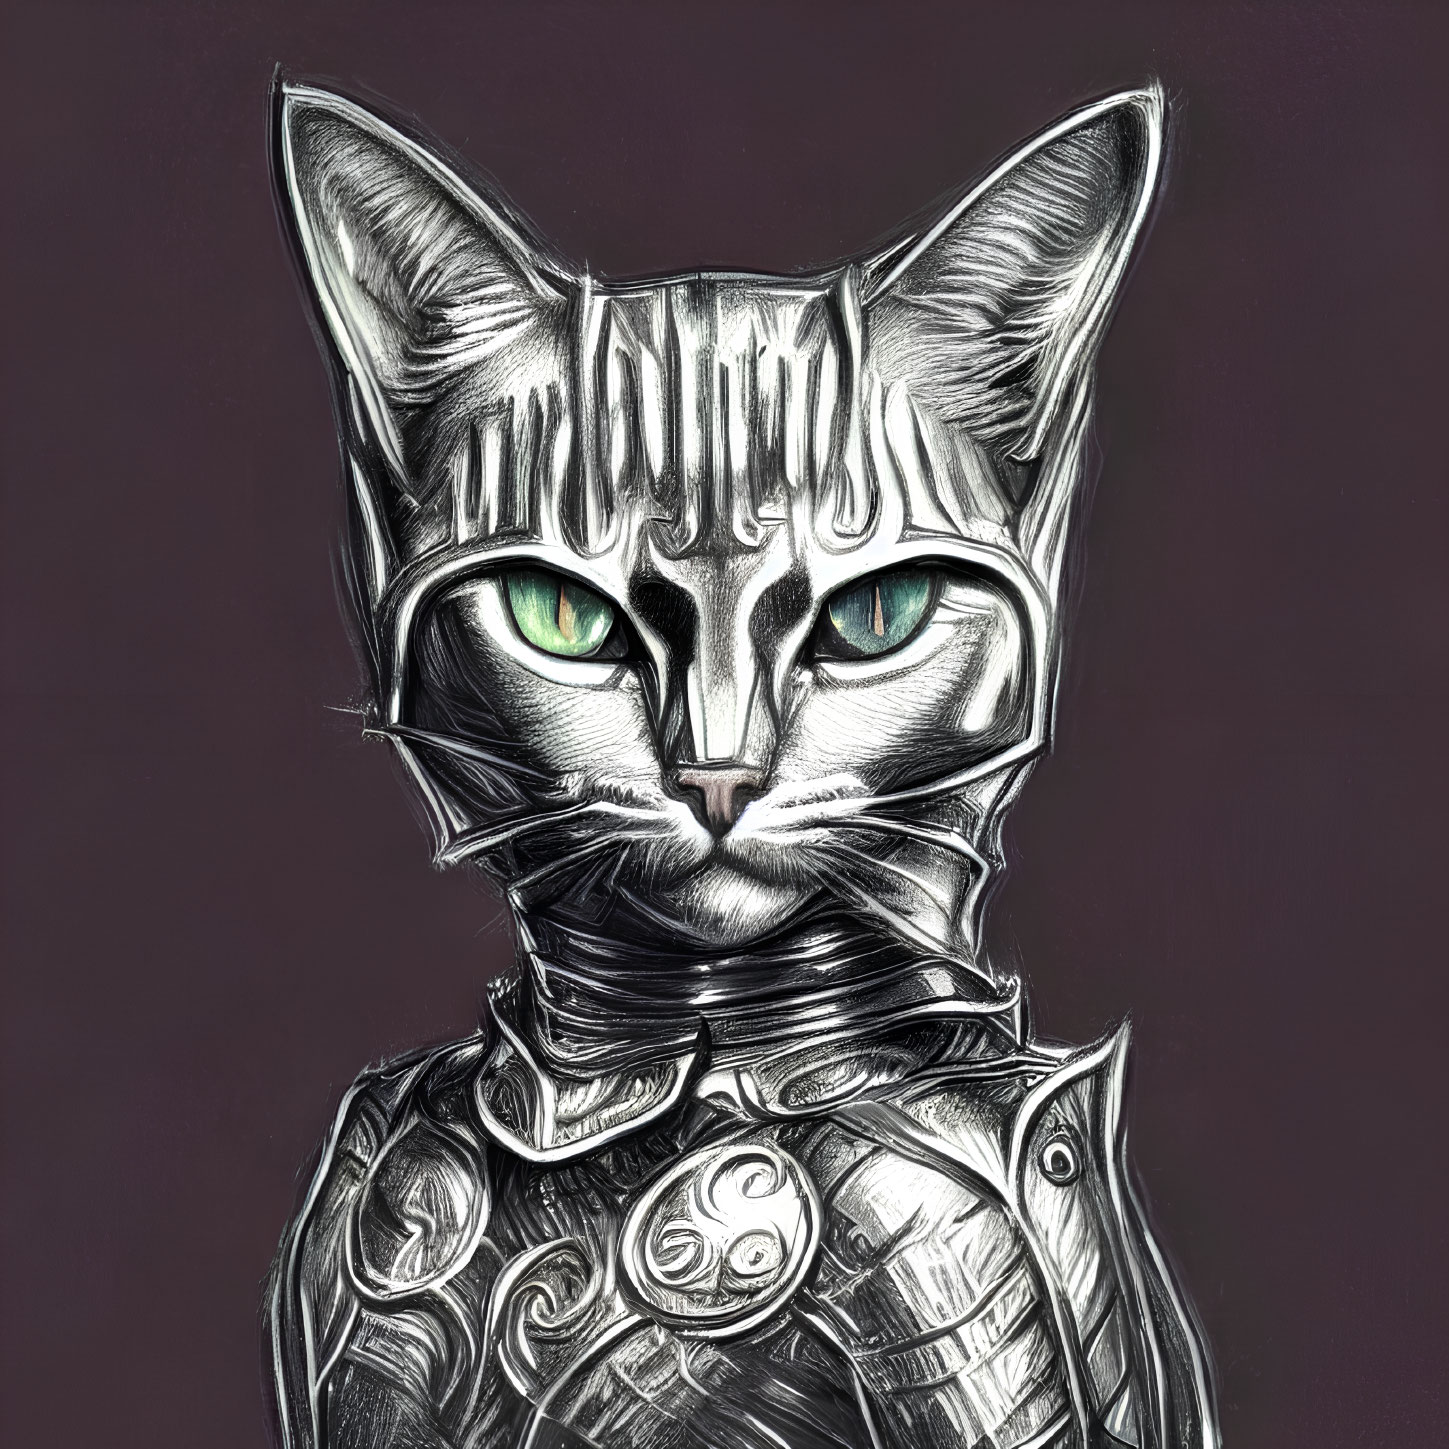 Illustration of a cat in metallic armor with human-like eyes